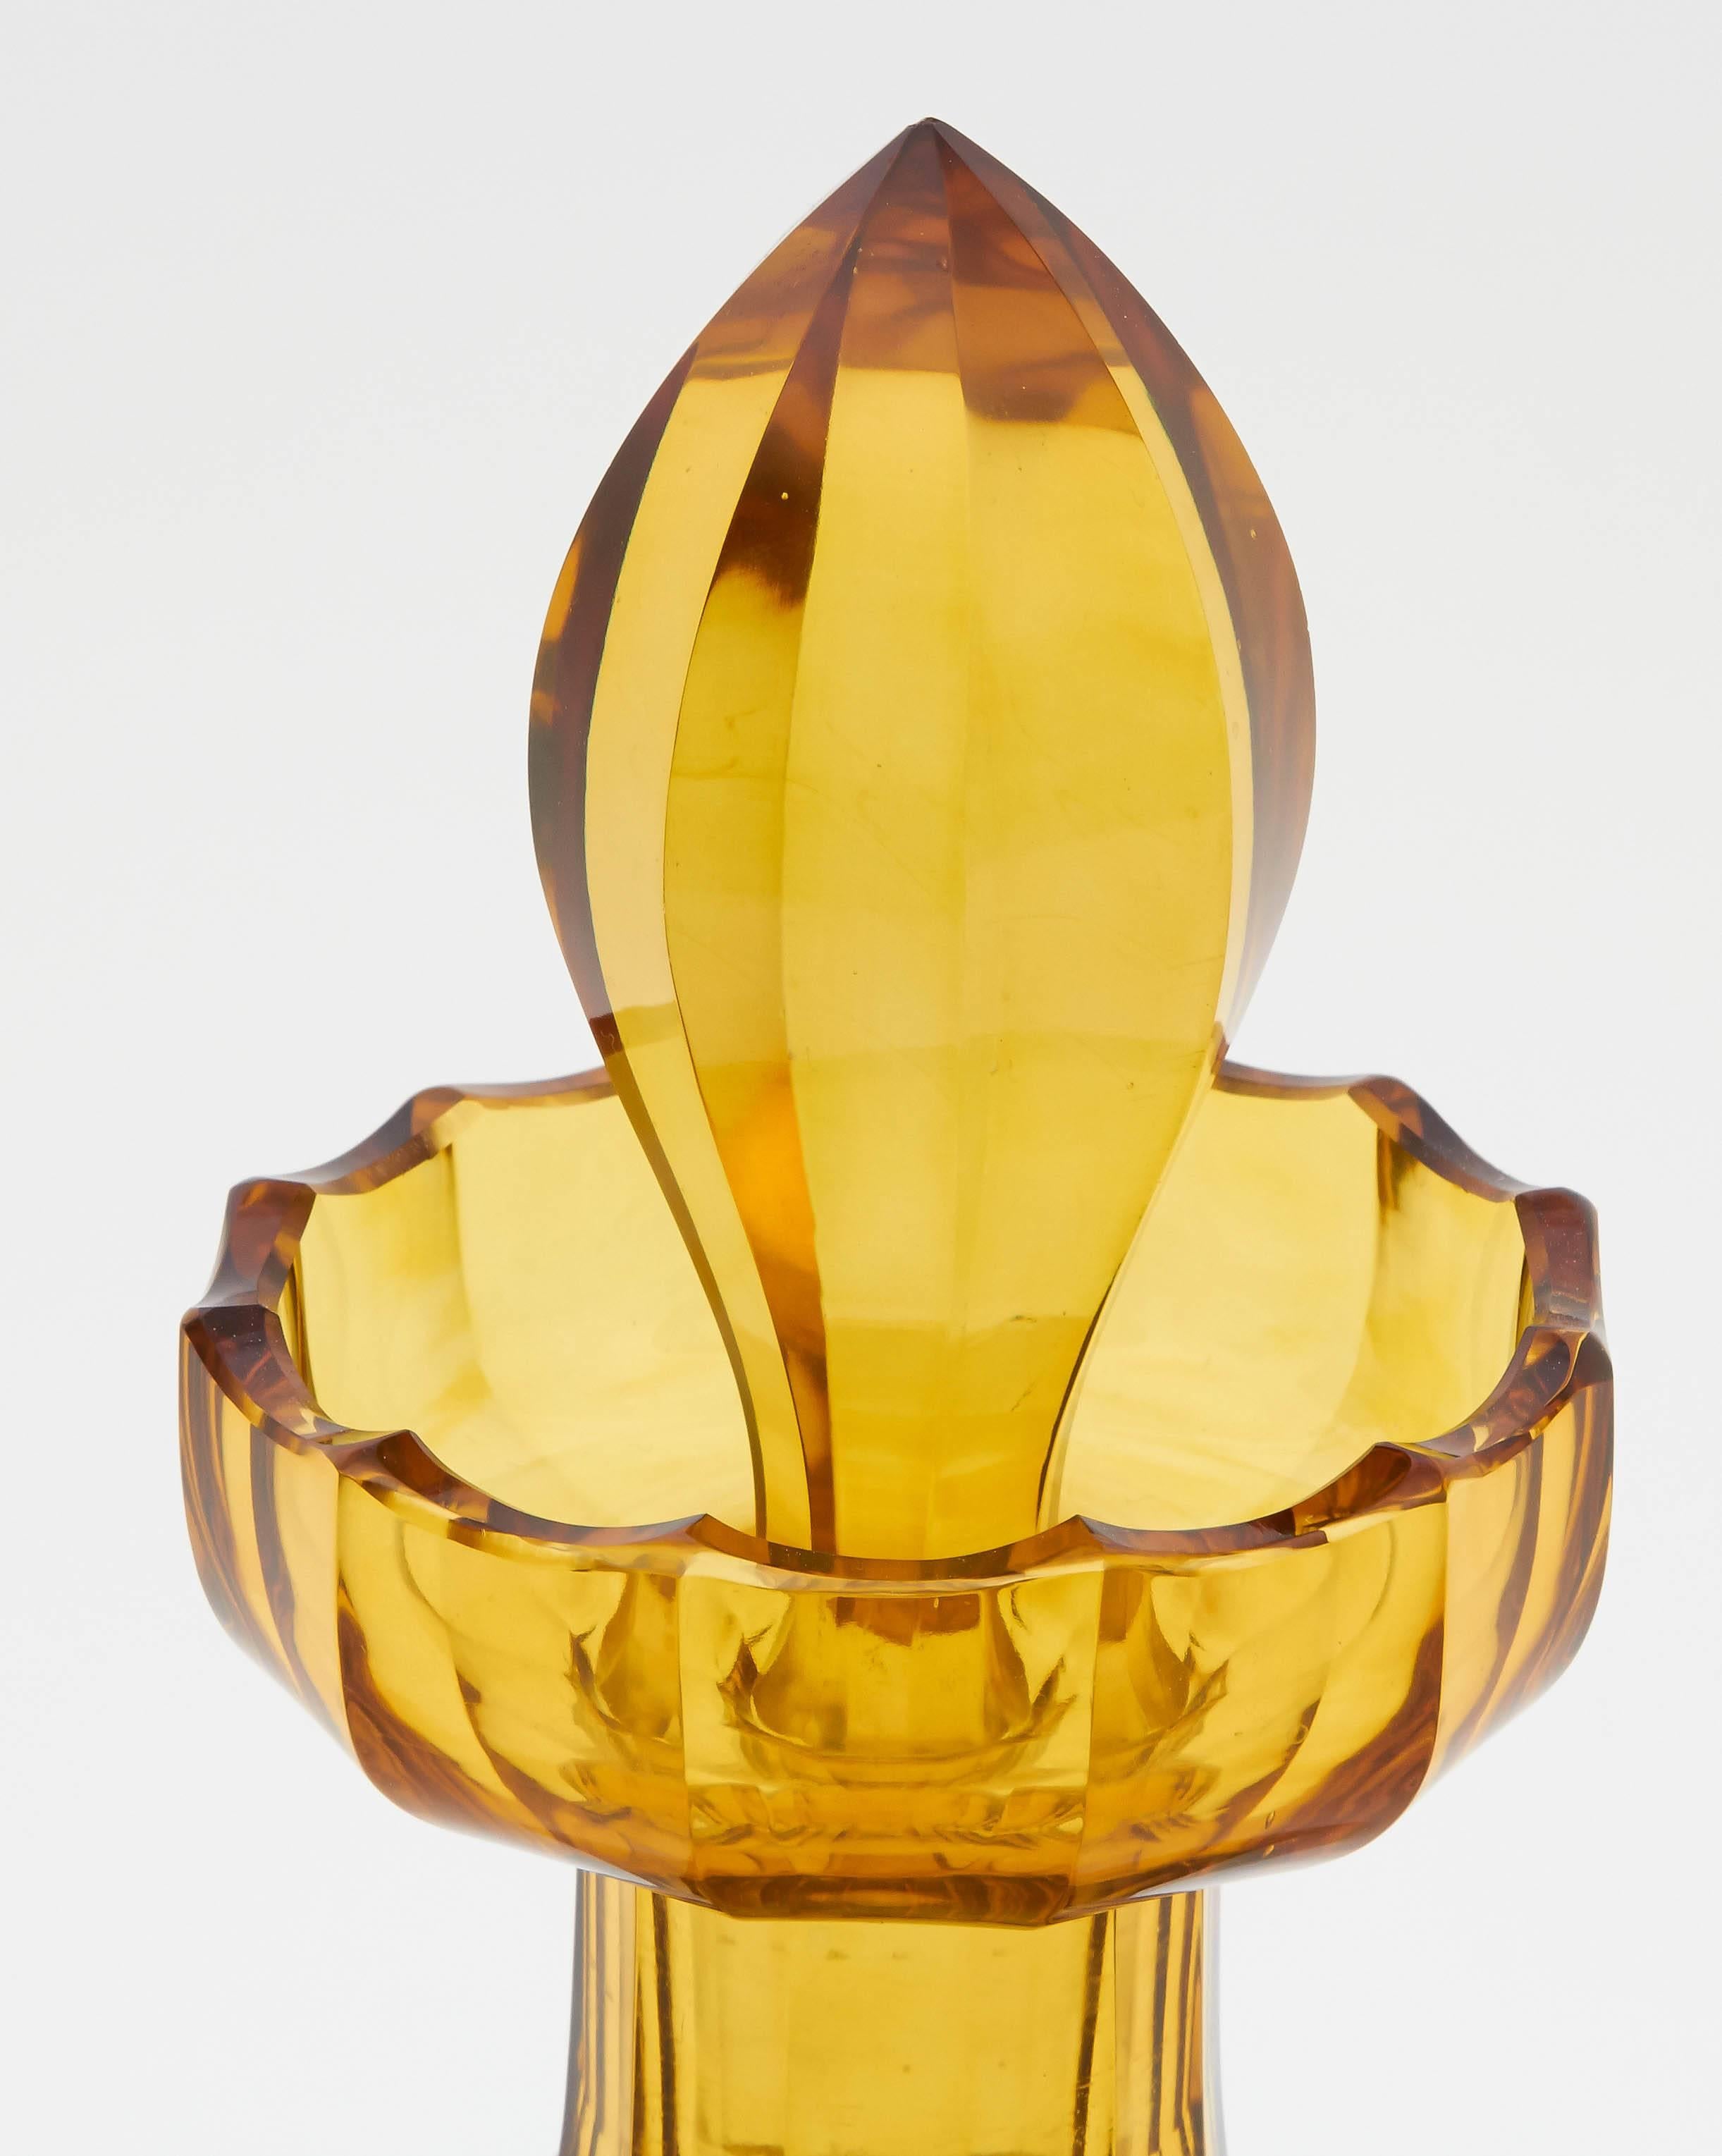 Antique English decanter. This 1870s decanter is in amber-colored glass. The design is very elegant for a bar story or dinner party.